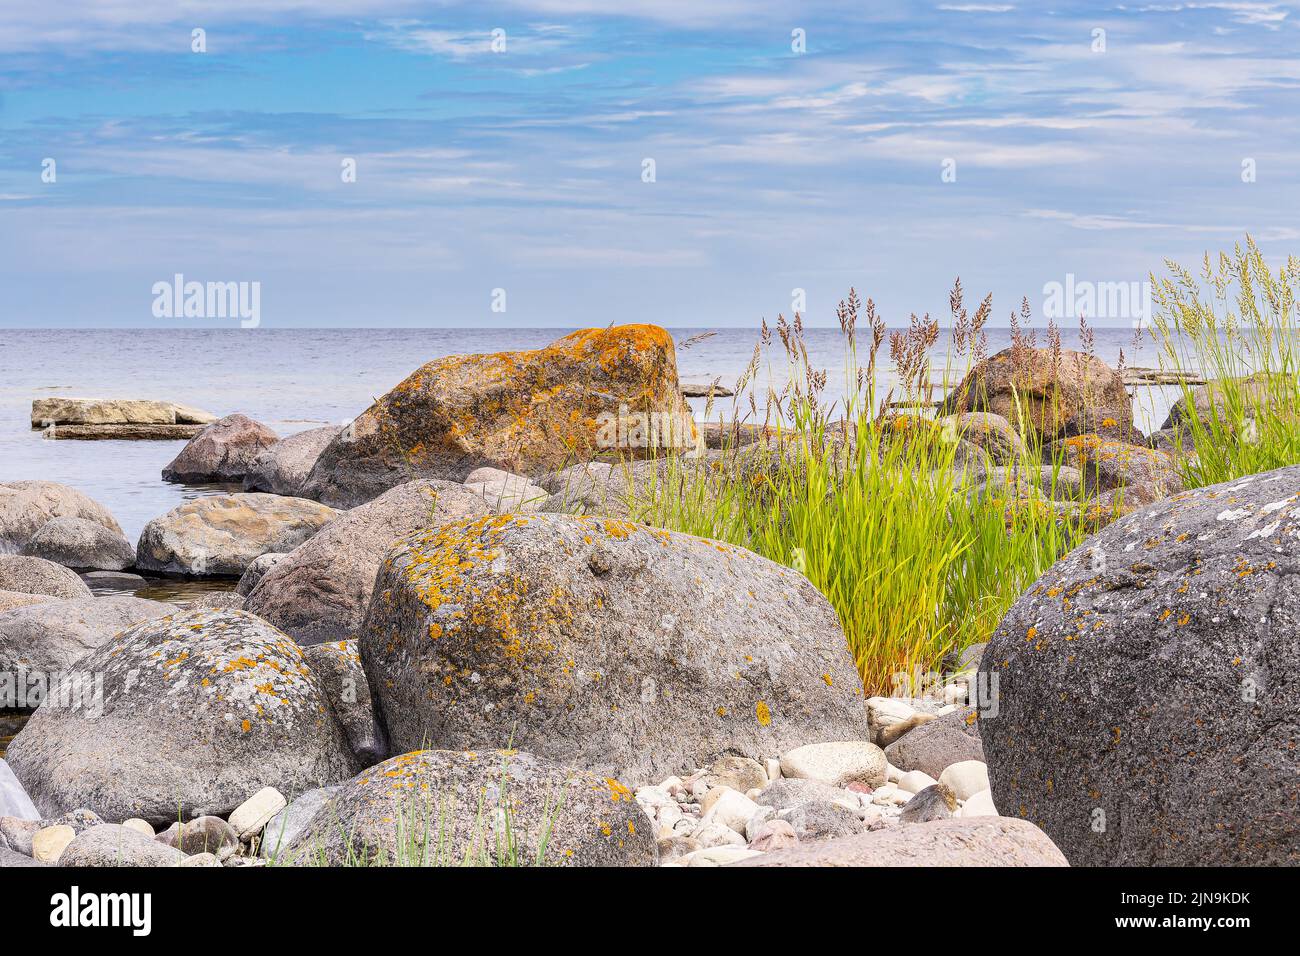 Stones on shore of the Baltic Sea on the island Öland in Sweden. Stock Photo